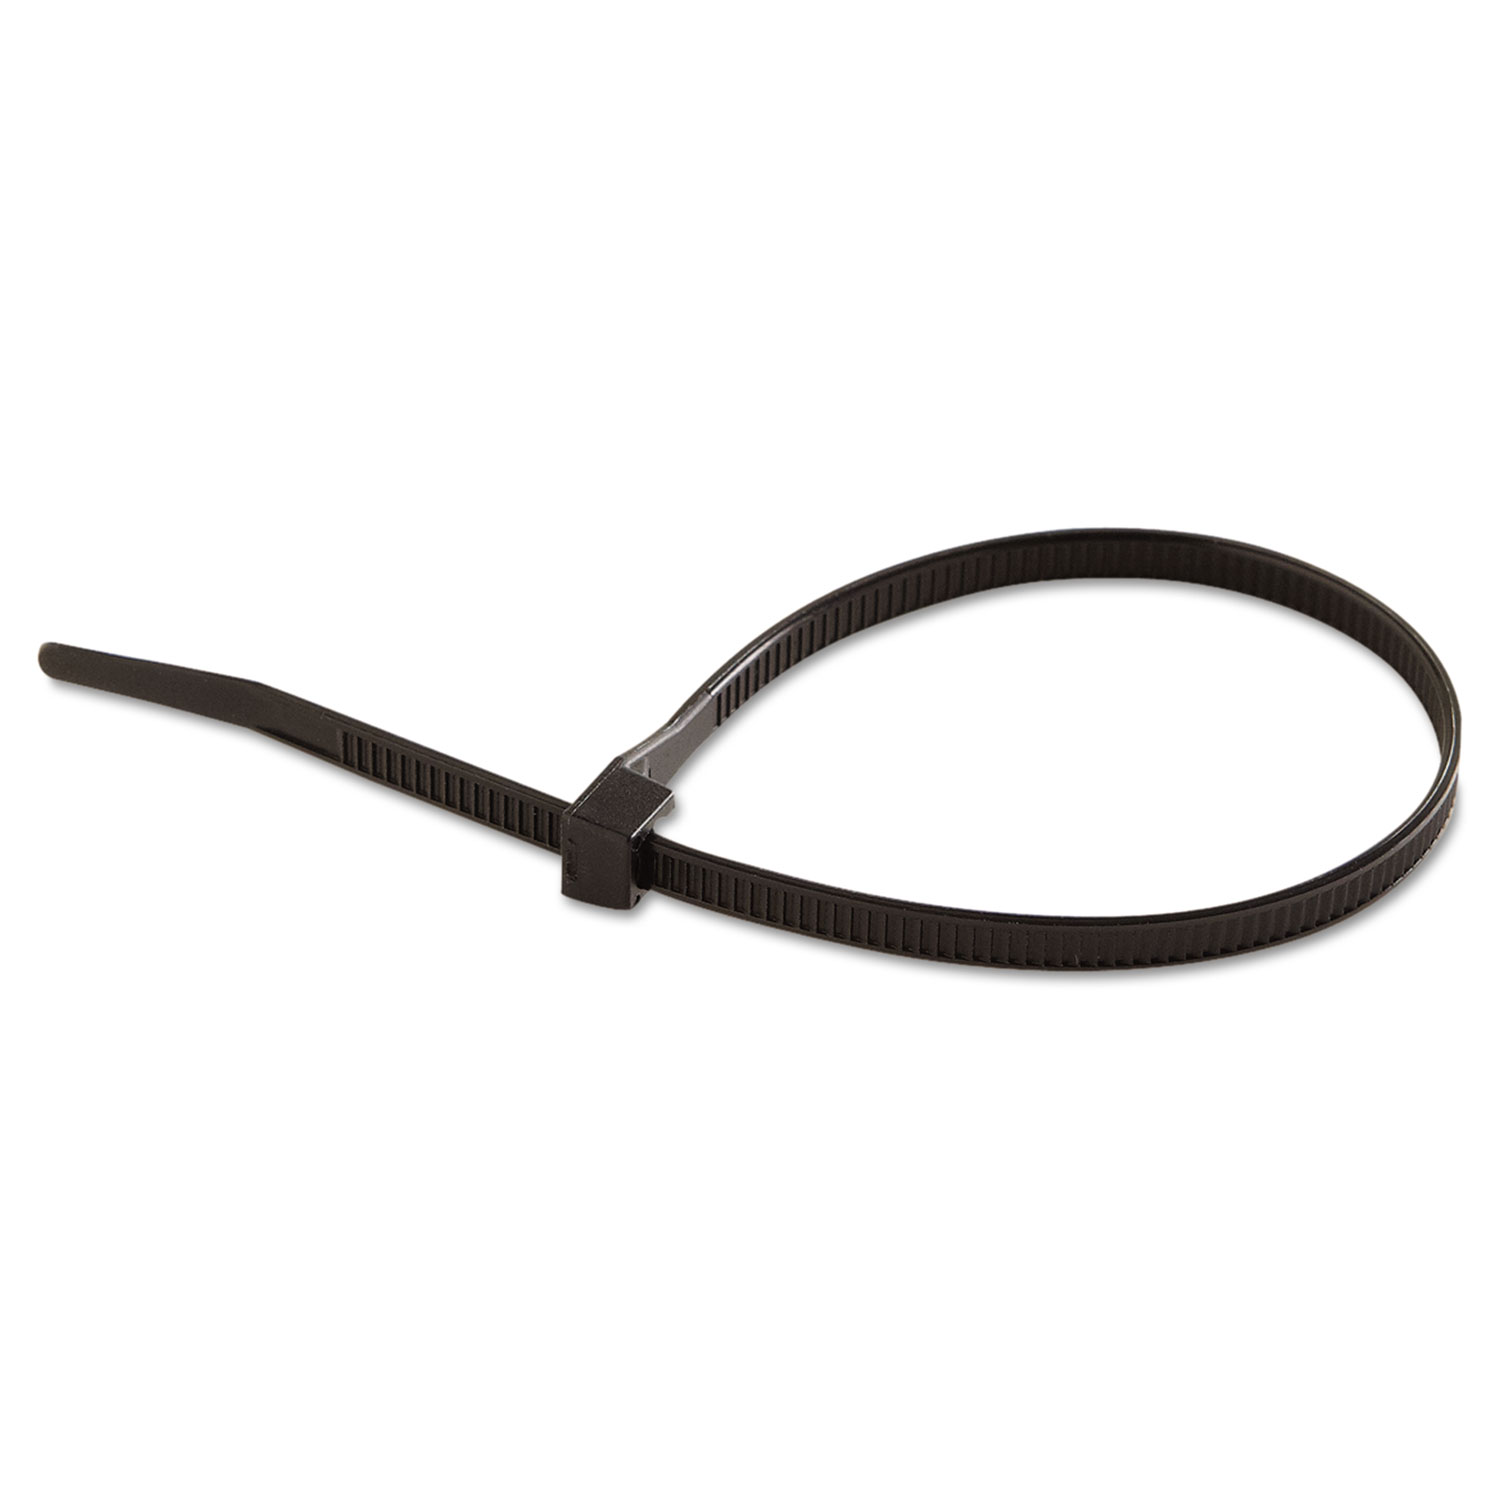 UVB Cable Ties, 8, 75 lb, UV Black, 100/Pack